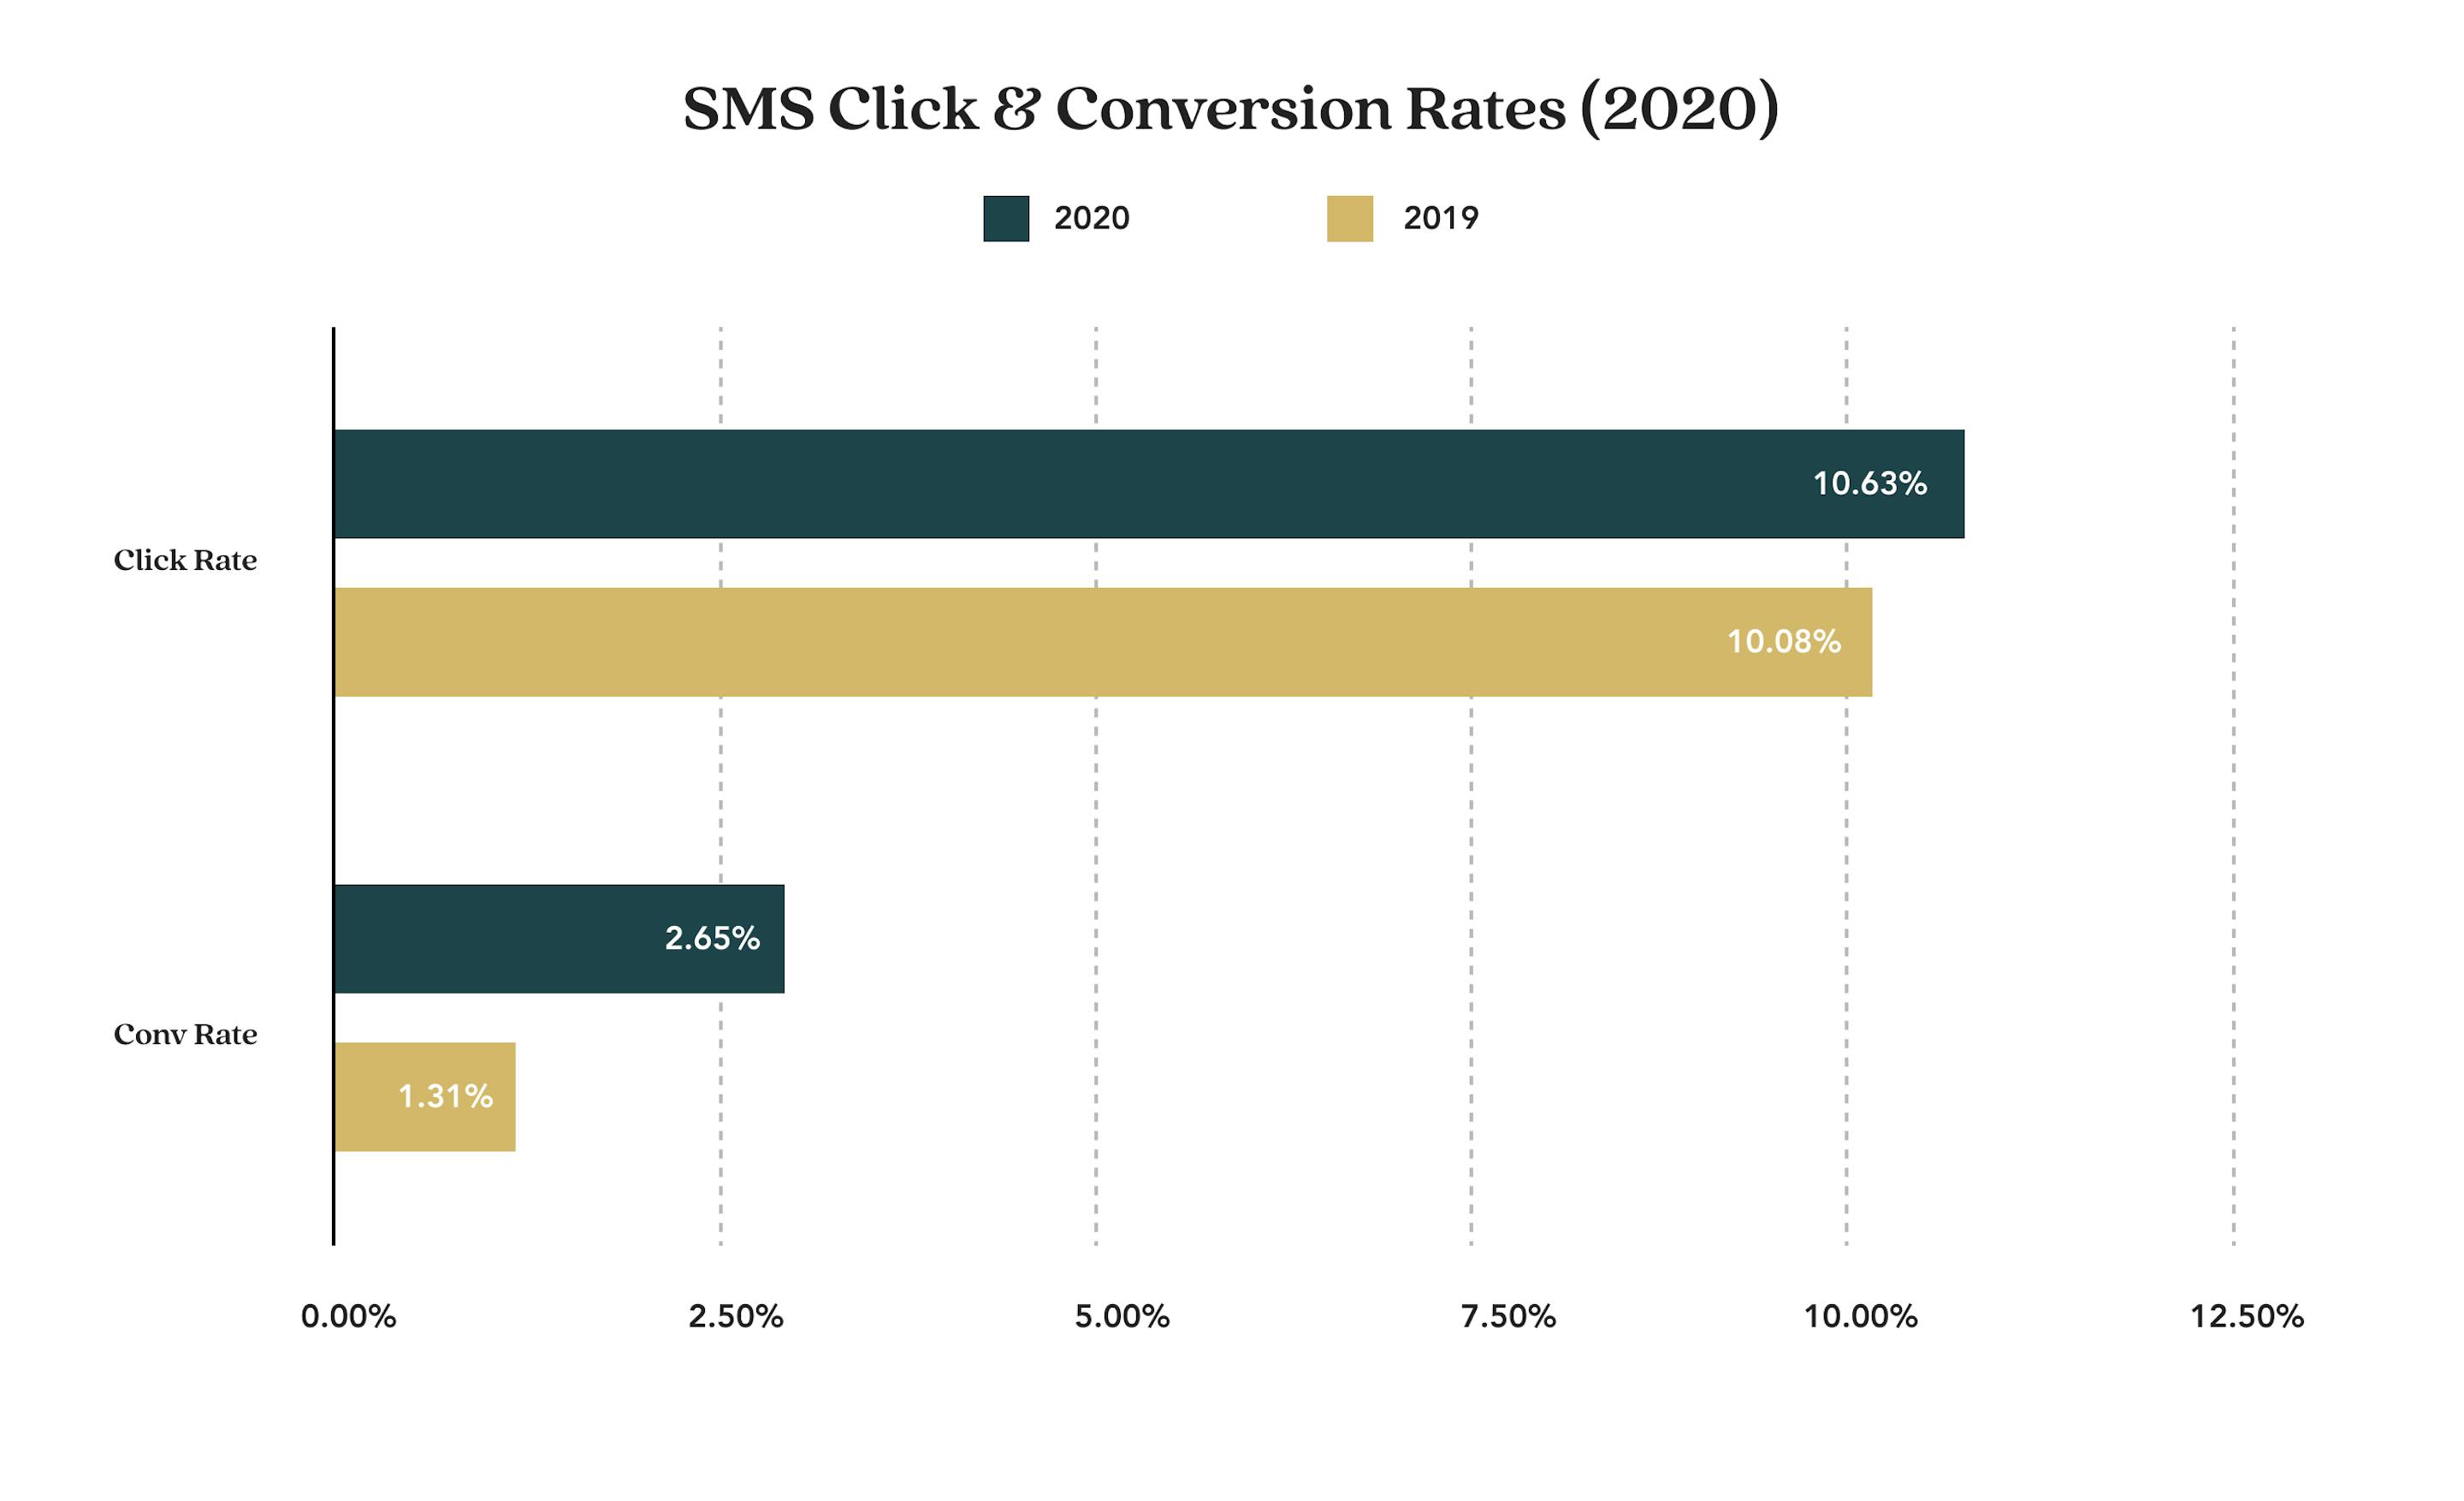 SMS click and conversion rates